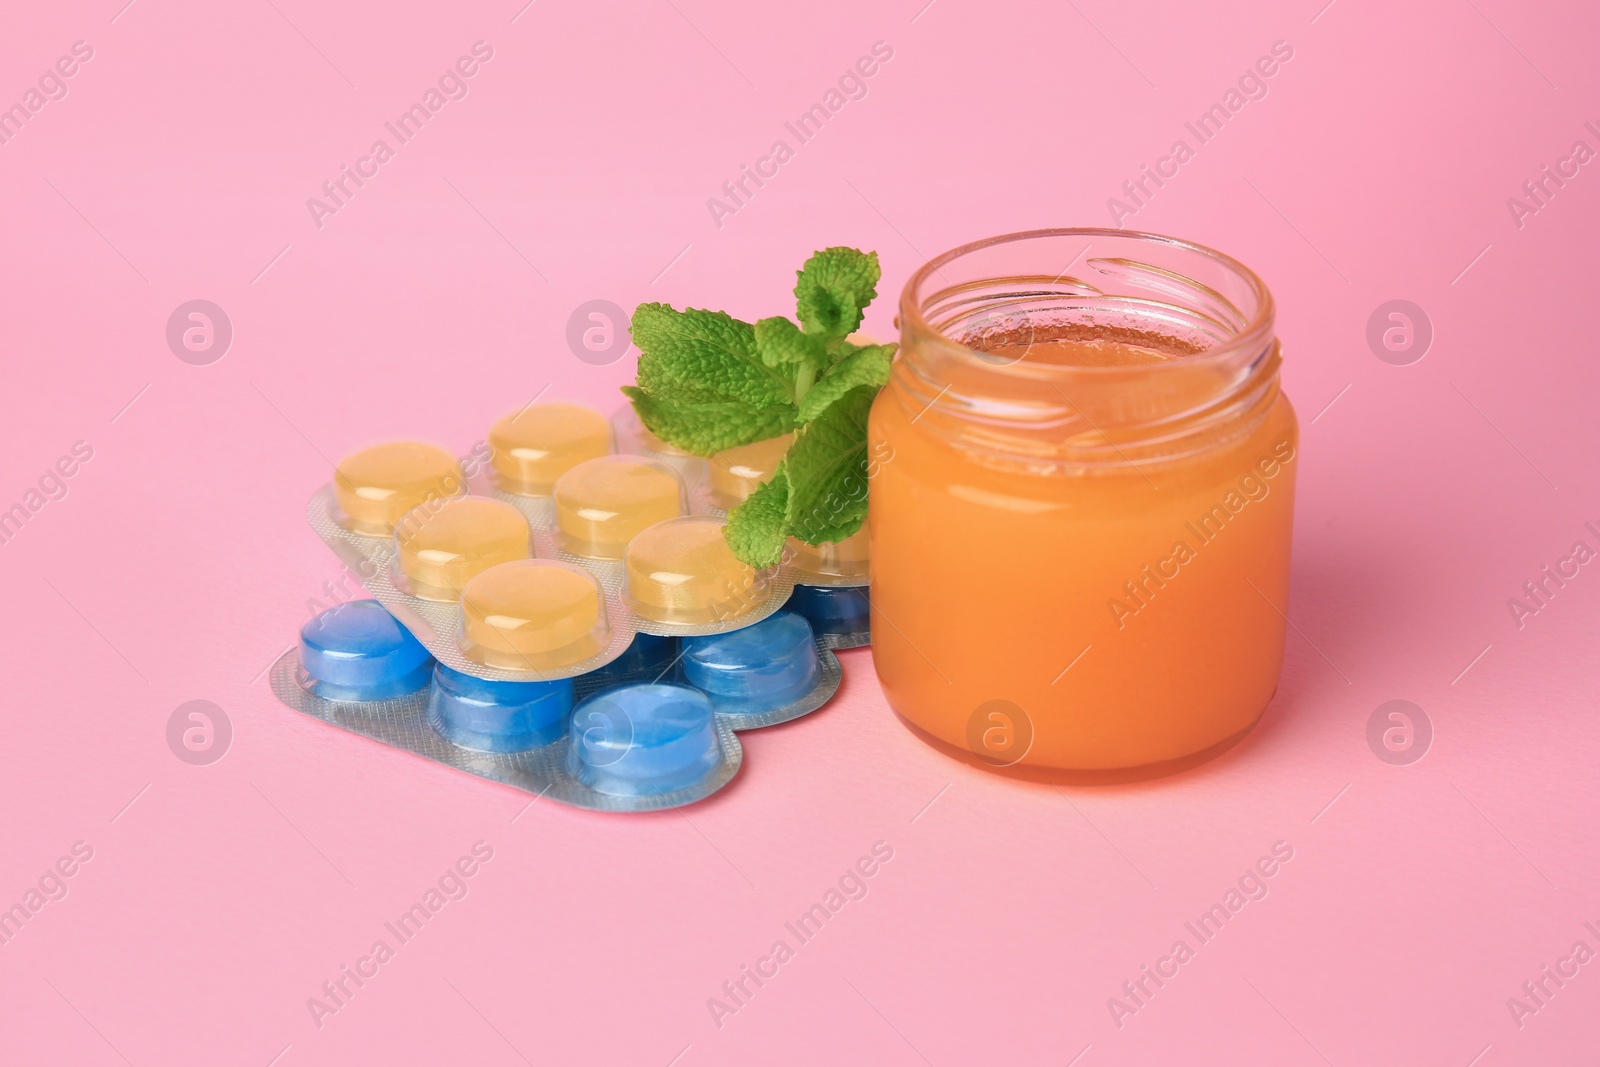 Photo of Blisters with cough drops, honey and mint on pink background